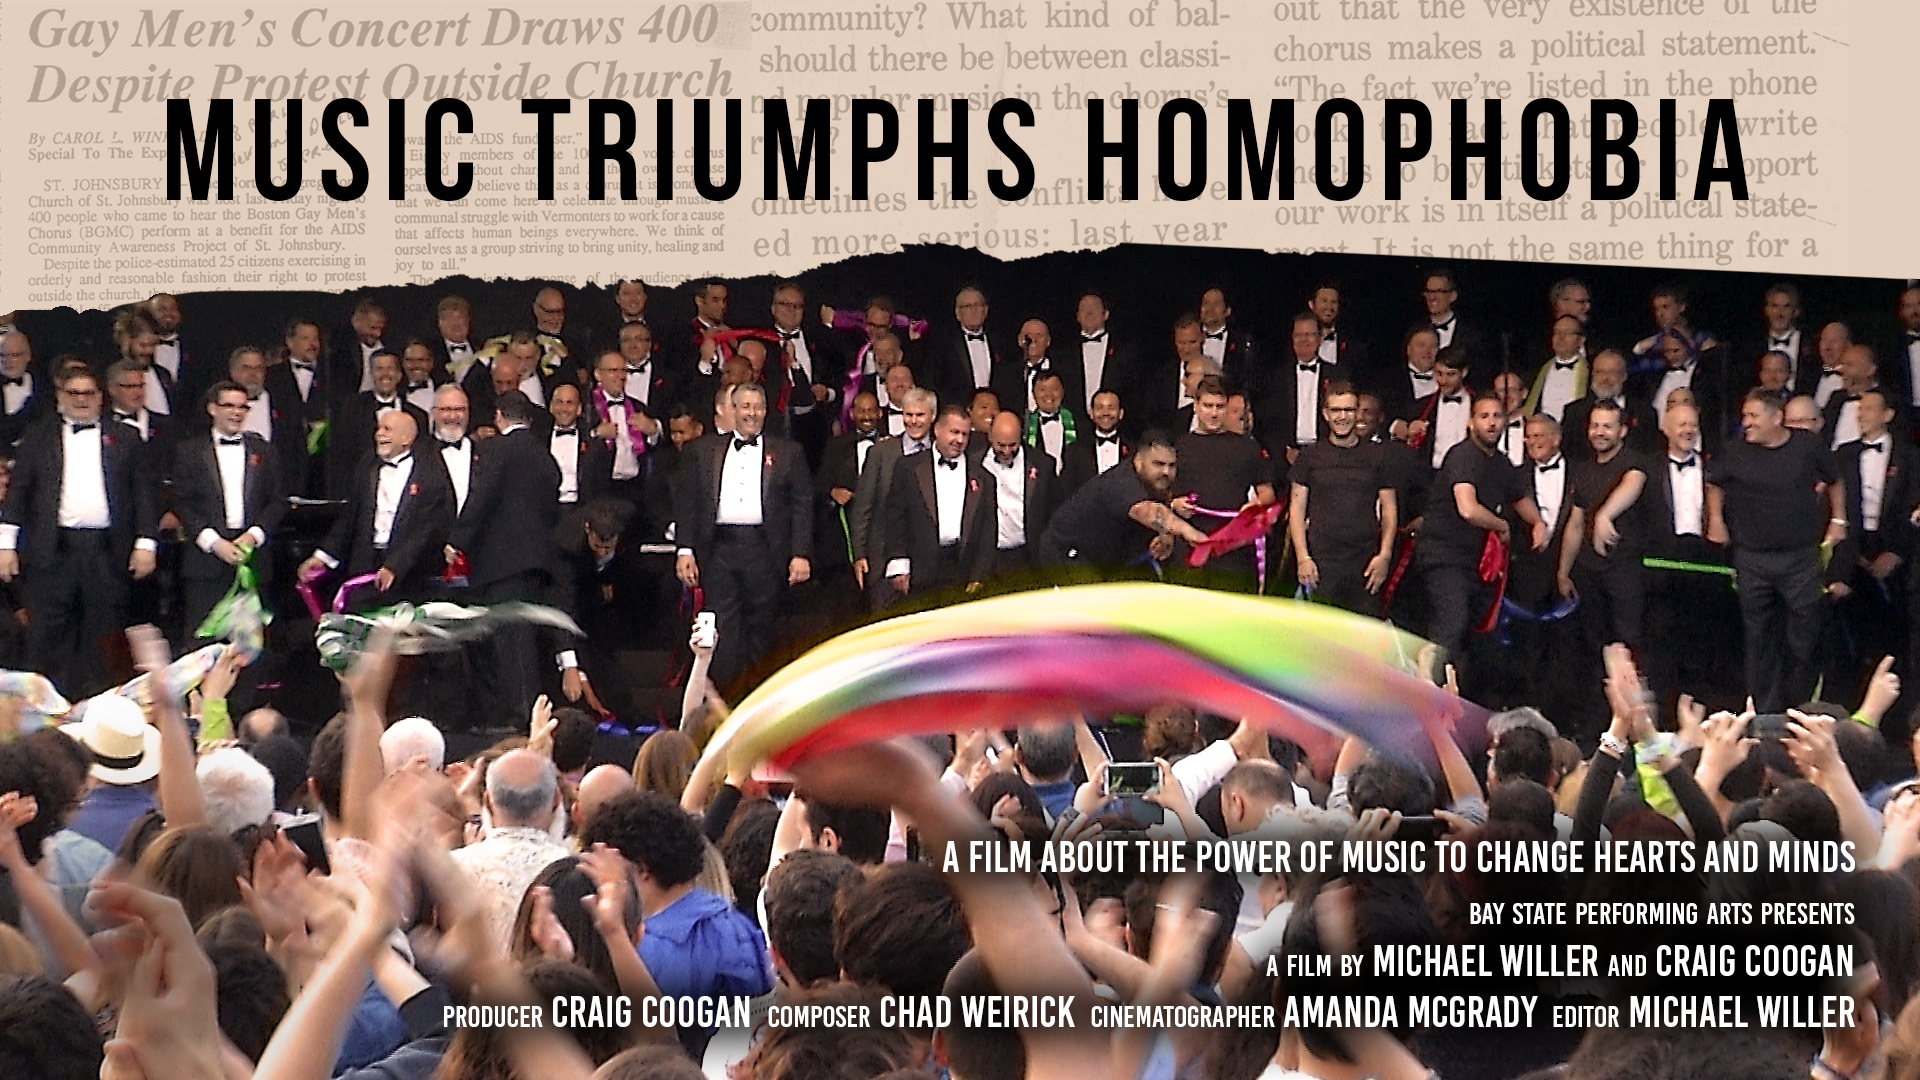 Title Music Triumphs Homophobia Members of the Boston Gay Men's Chorus performing on stage as an audience member waves a rainbow pride flag